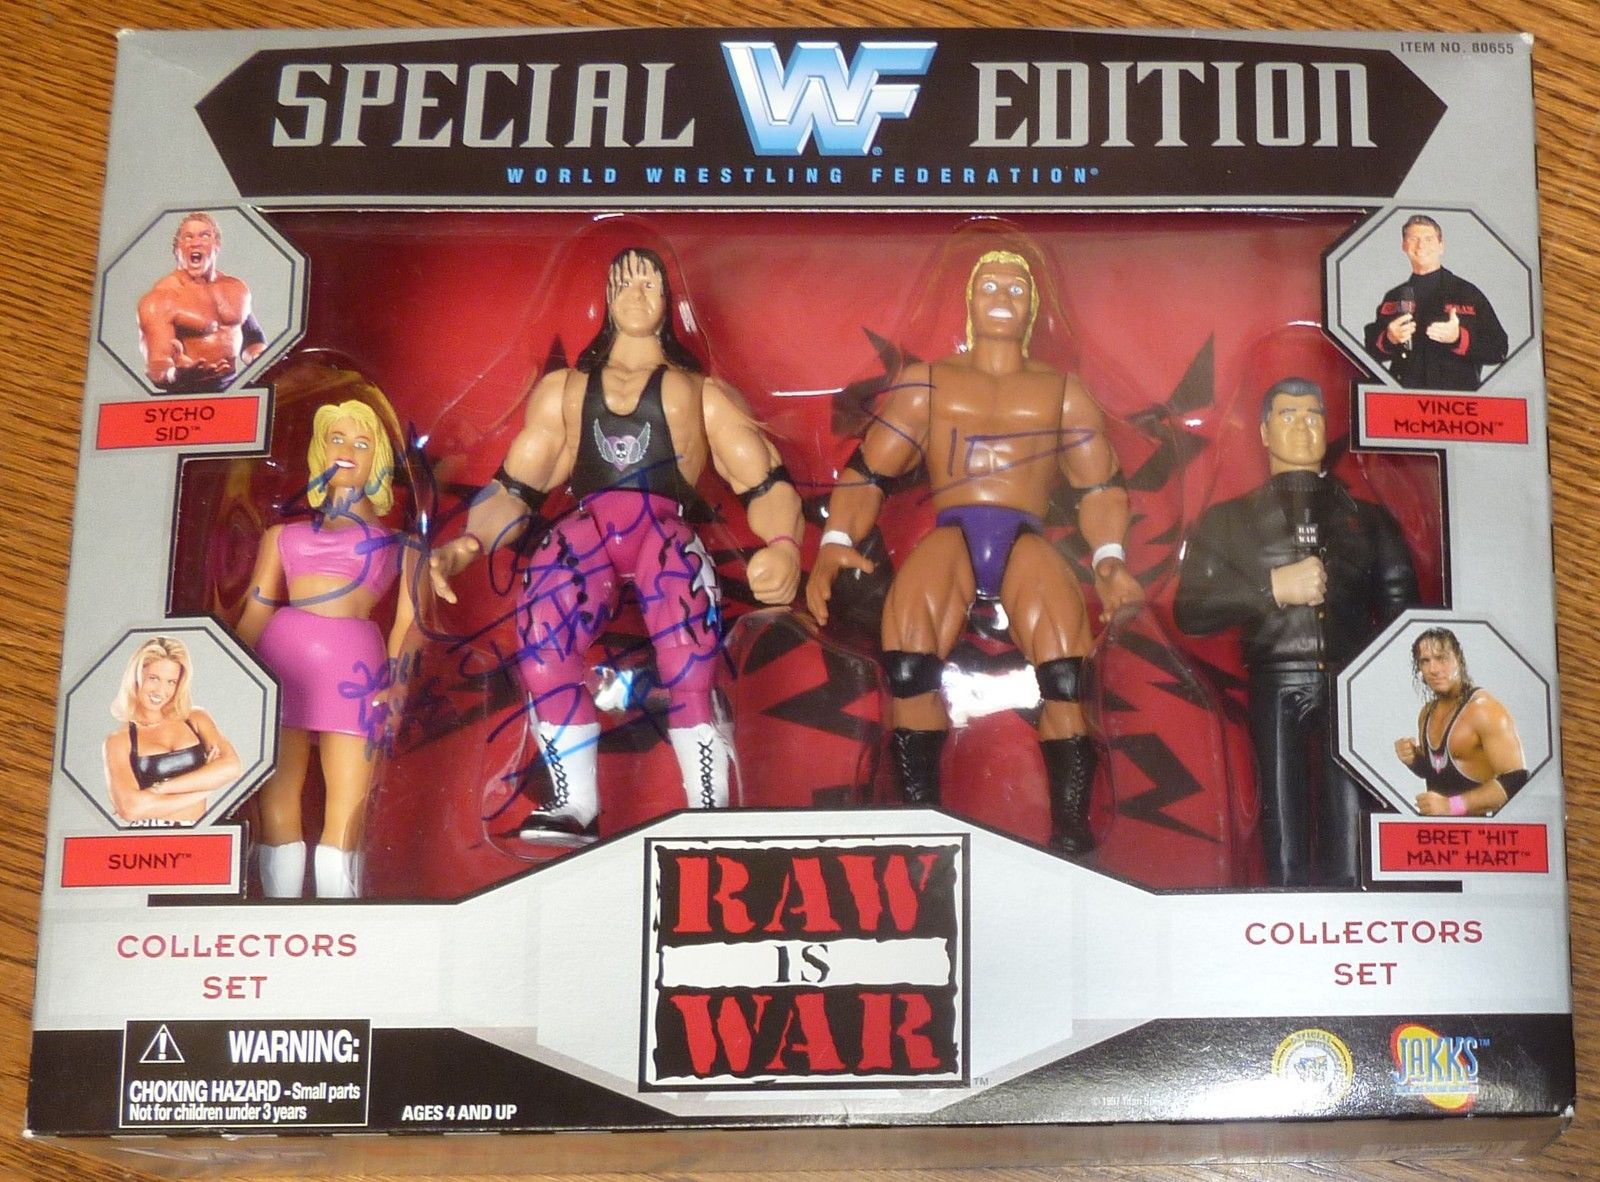 WWF figure collection Sunny Bret Hart Psycho Sid Vince McMahon 1